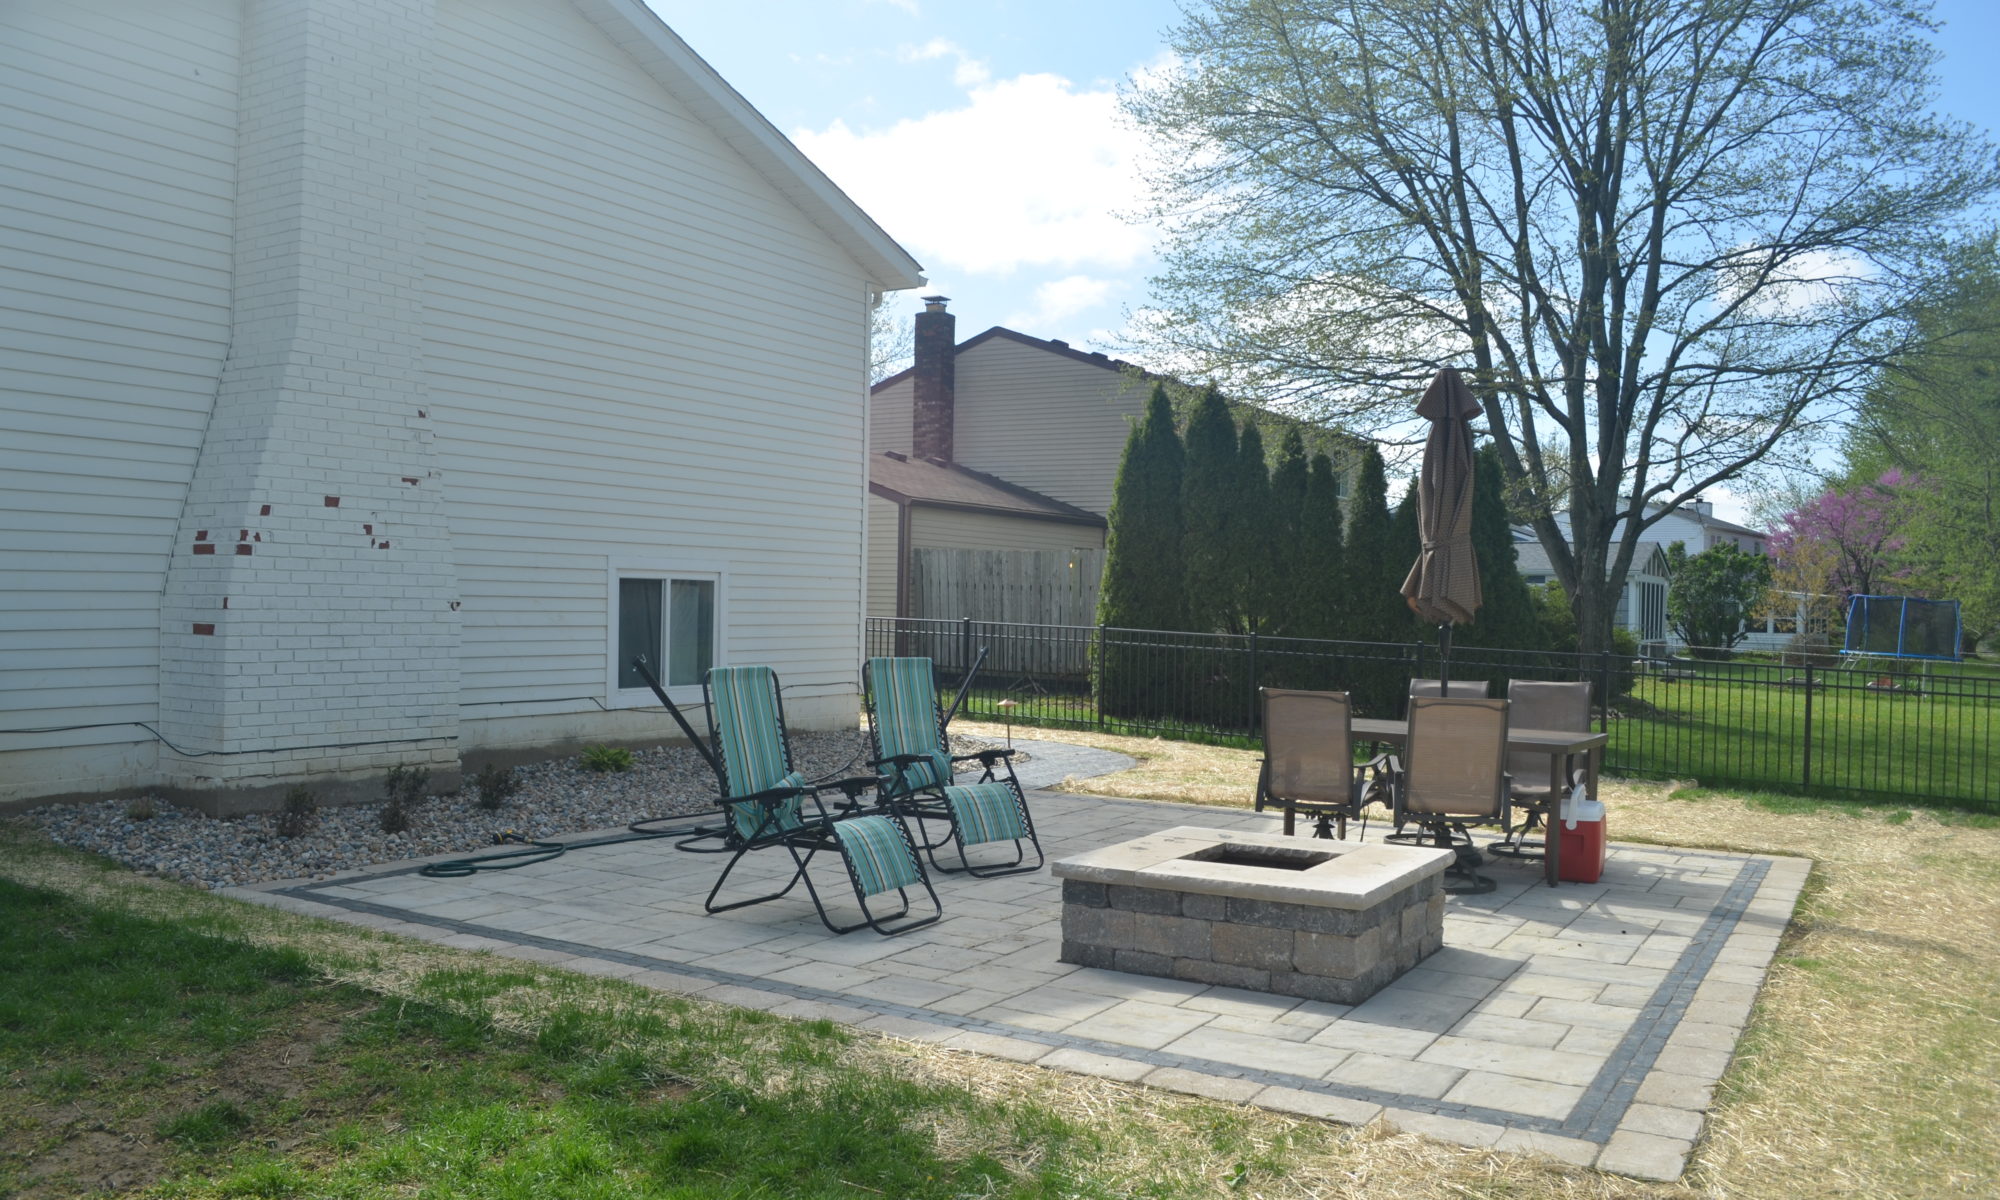 Precision Outdoors Dual Patios Plainfield Indiana Grilling patio dining patio firepit fire pit paver walkway landscaping outdoor space beautiful backyard summer grilling outside pavers patios secluded separate patios